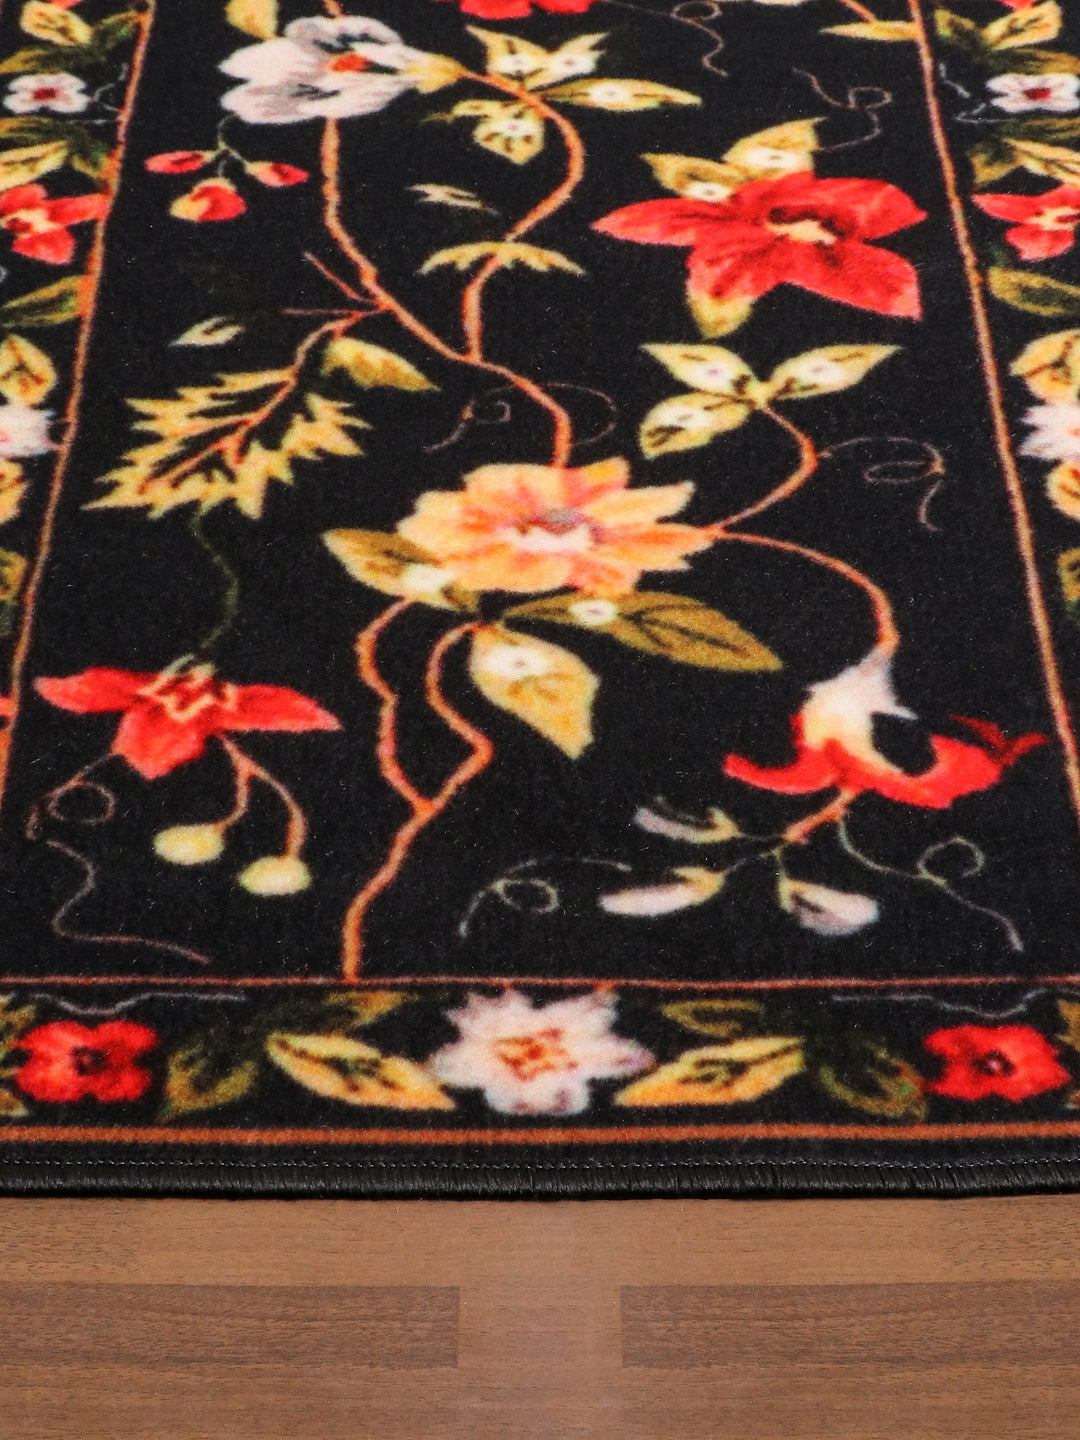 Black with Multi Color Floral Print Runner